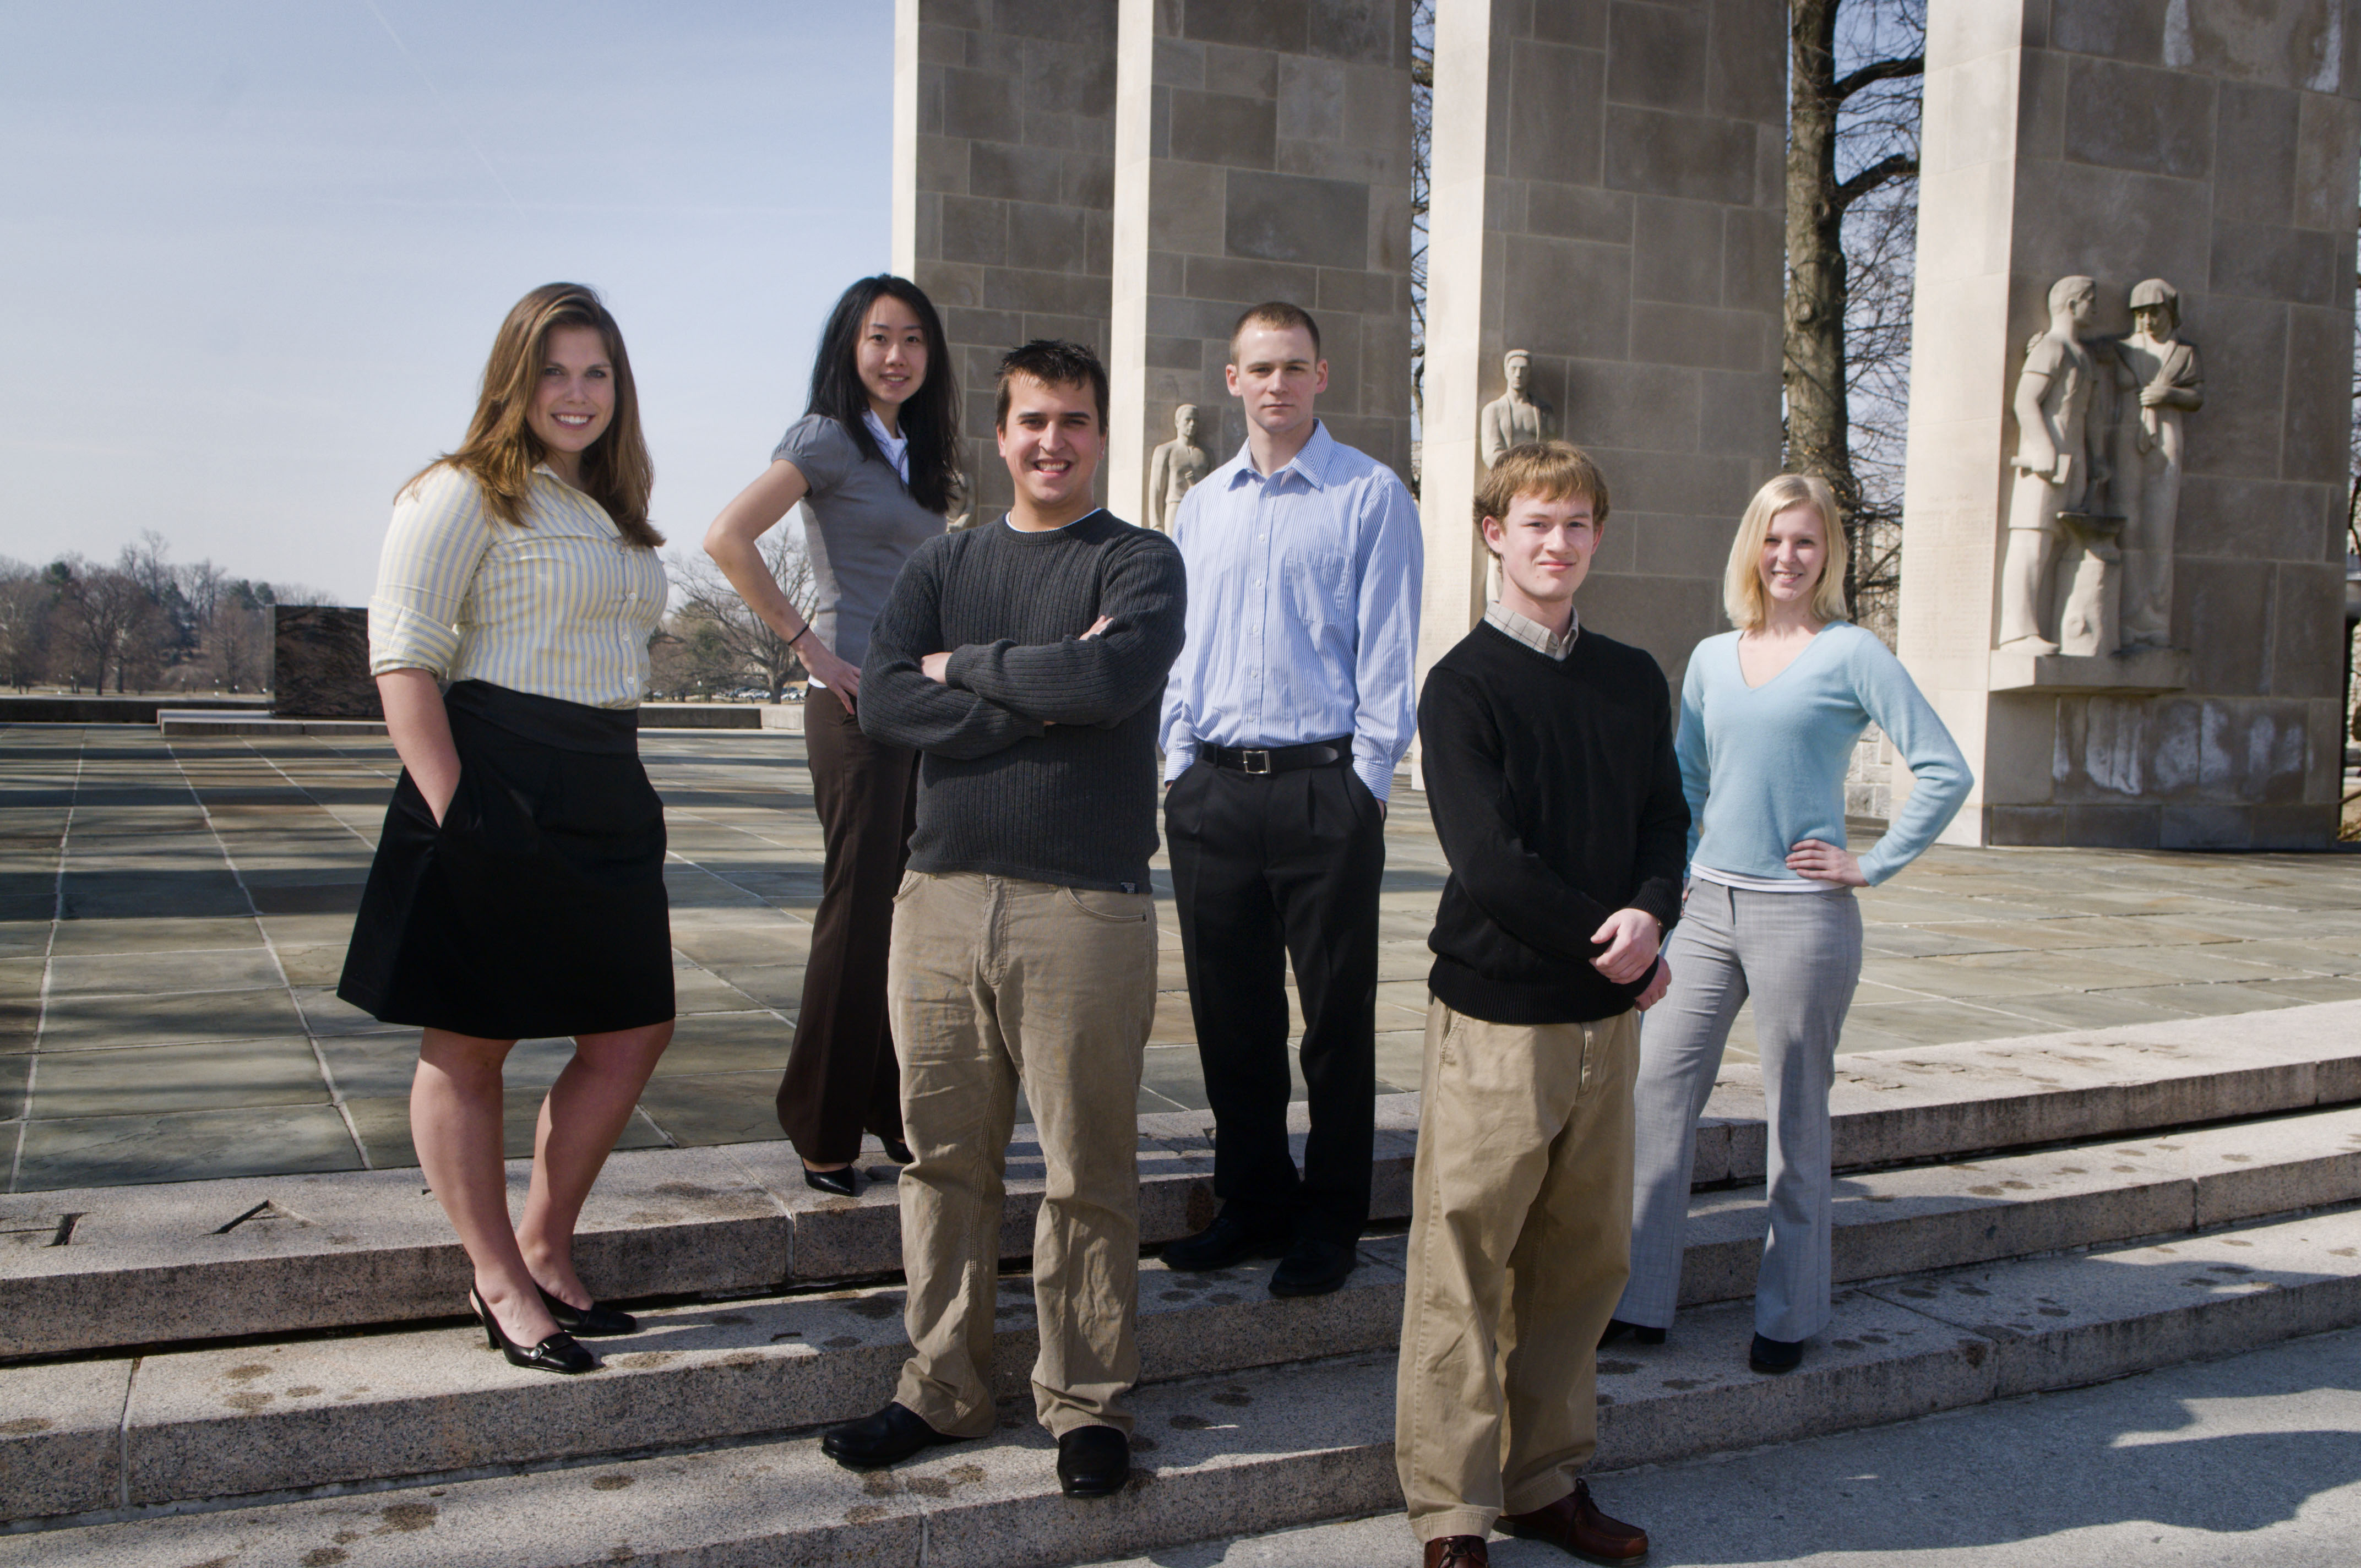 Virginia Tech students who will  present their research at the fourth annual Atlantic Coast Conference Meeting of the Minds undergraduate research conference in at North Carolina State University on April 2-4 are (left to right) Michelle Klassen, Sara Lu, Aaron Kroll, Jon Crain, Garrett Smith, and Sandra Hobsen.